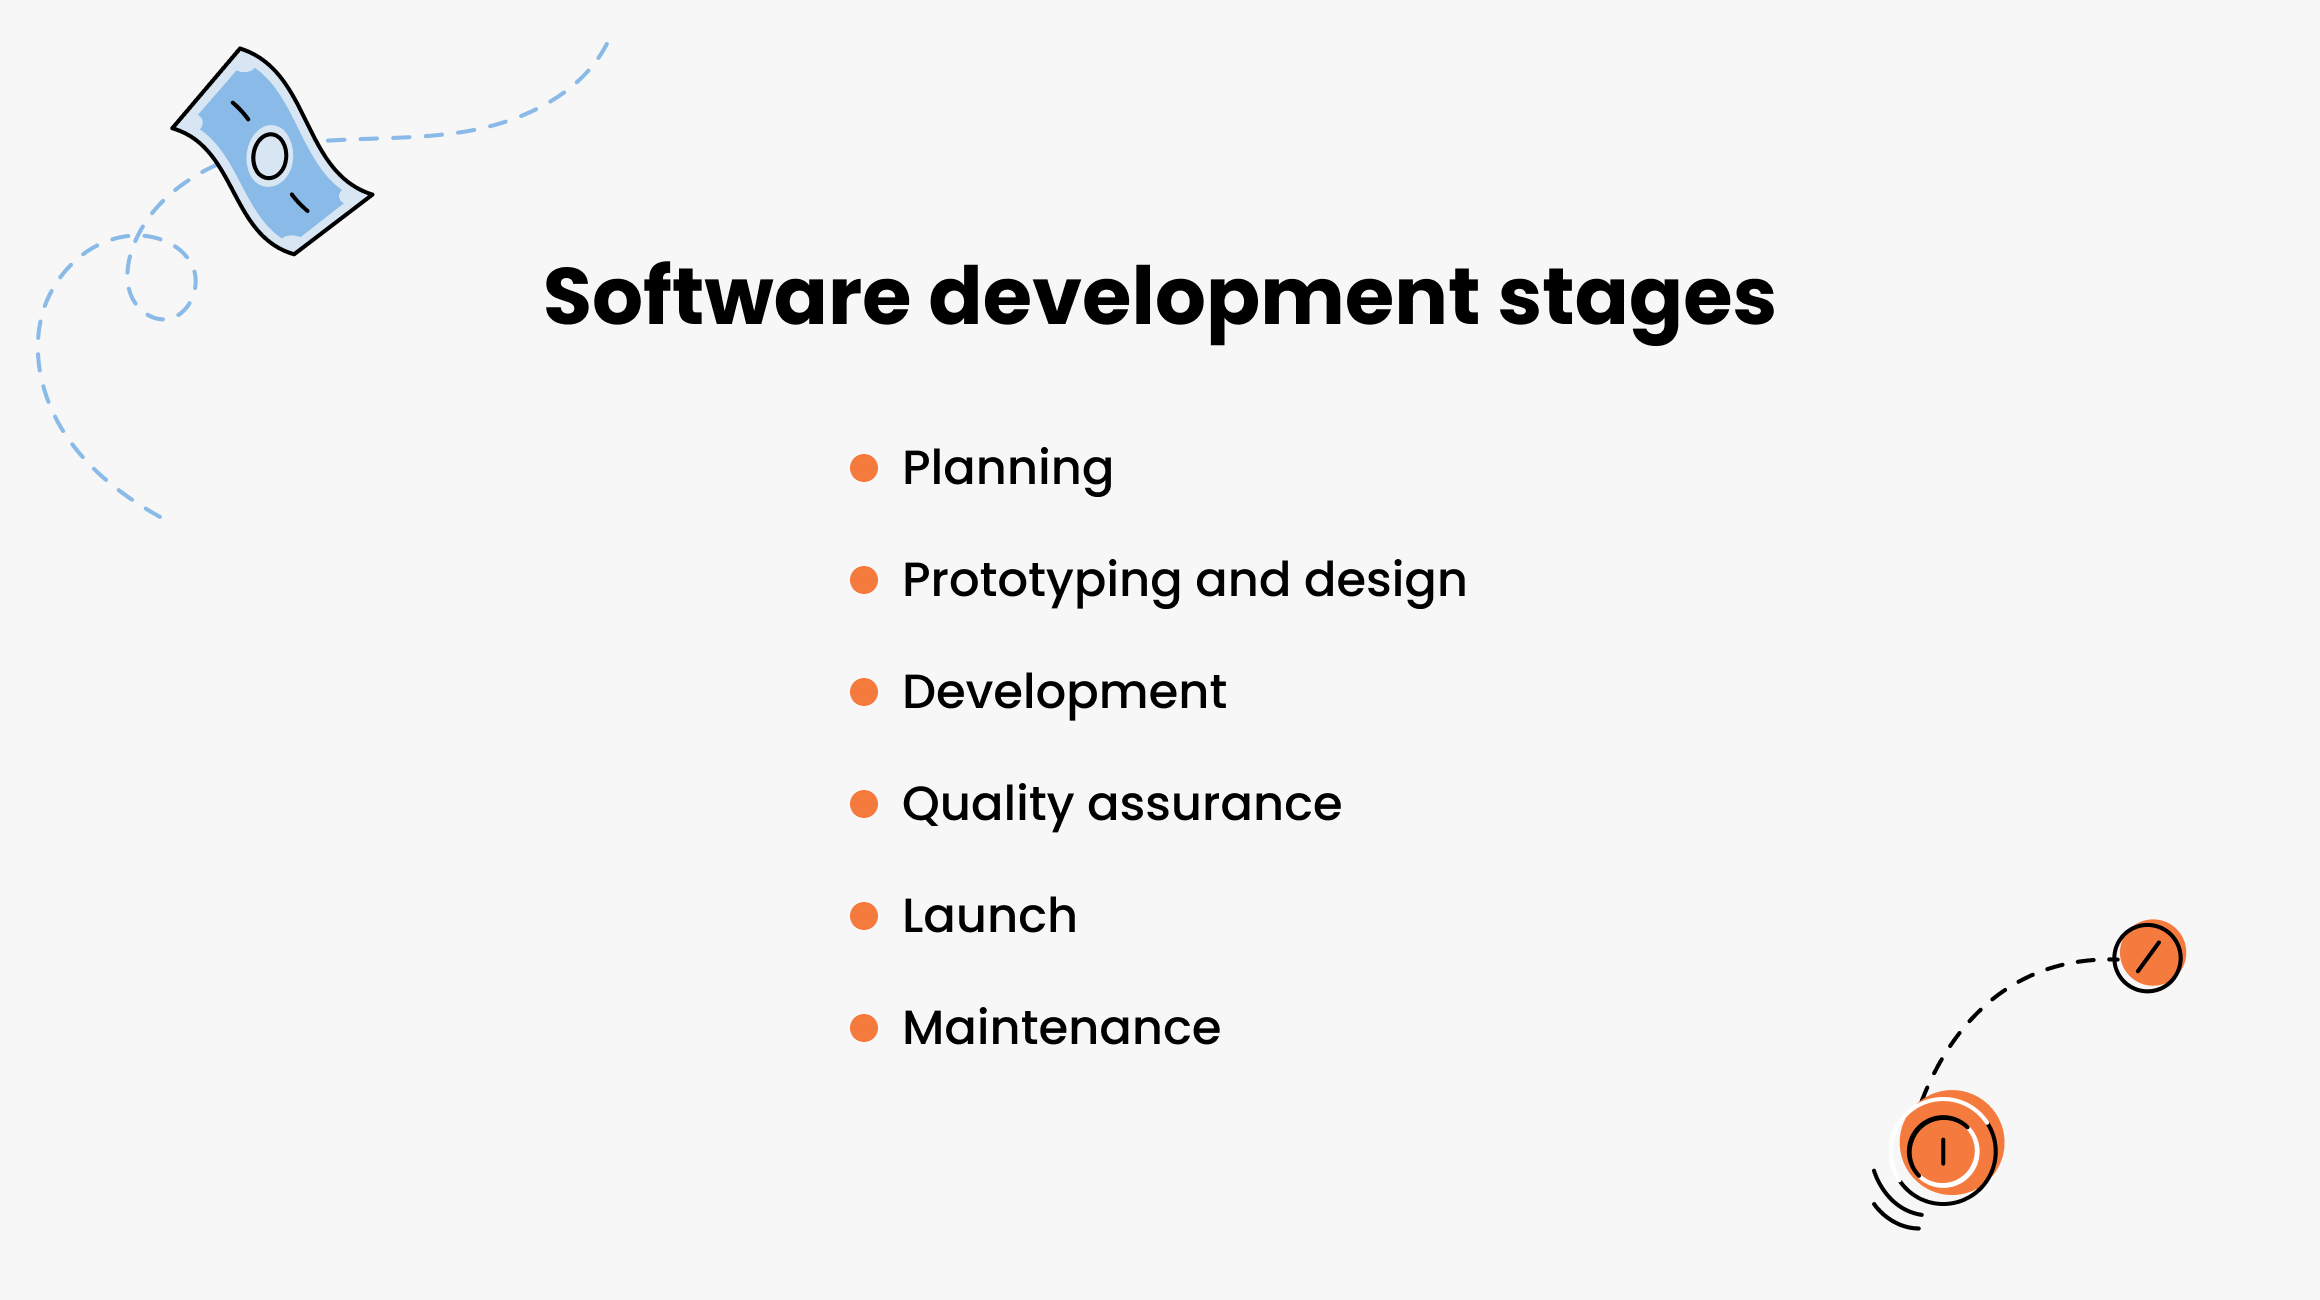 Stages of software development